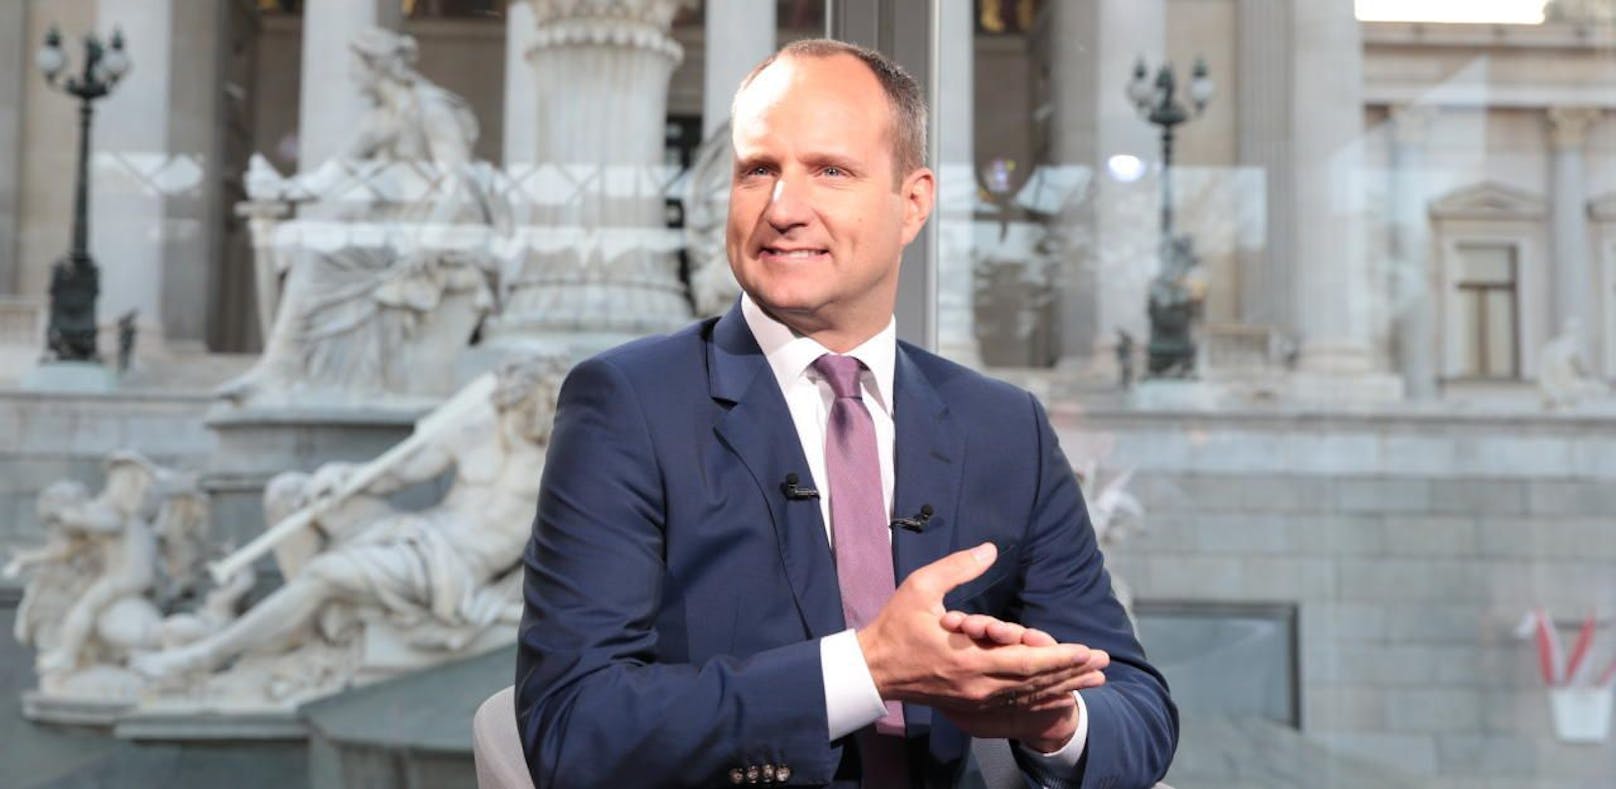 Neos-Strolz im ORF: "Alles andere is oasch"